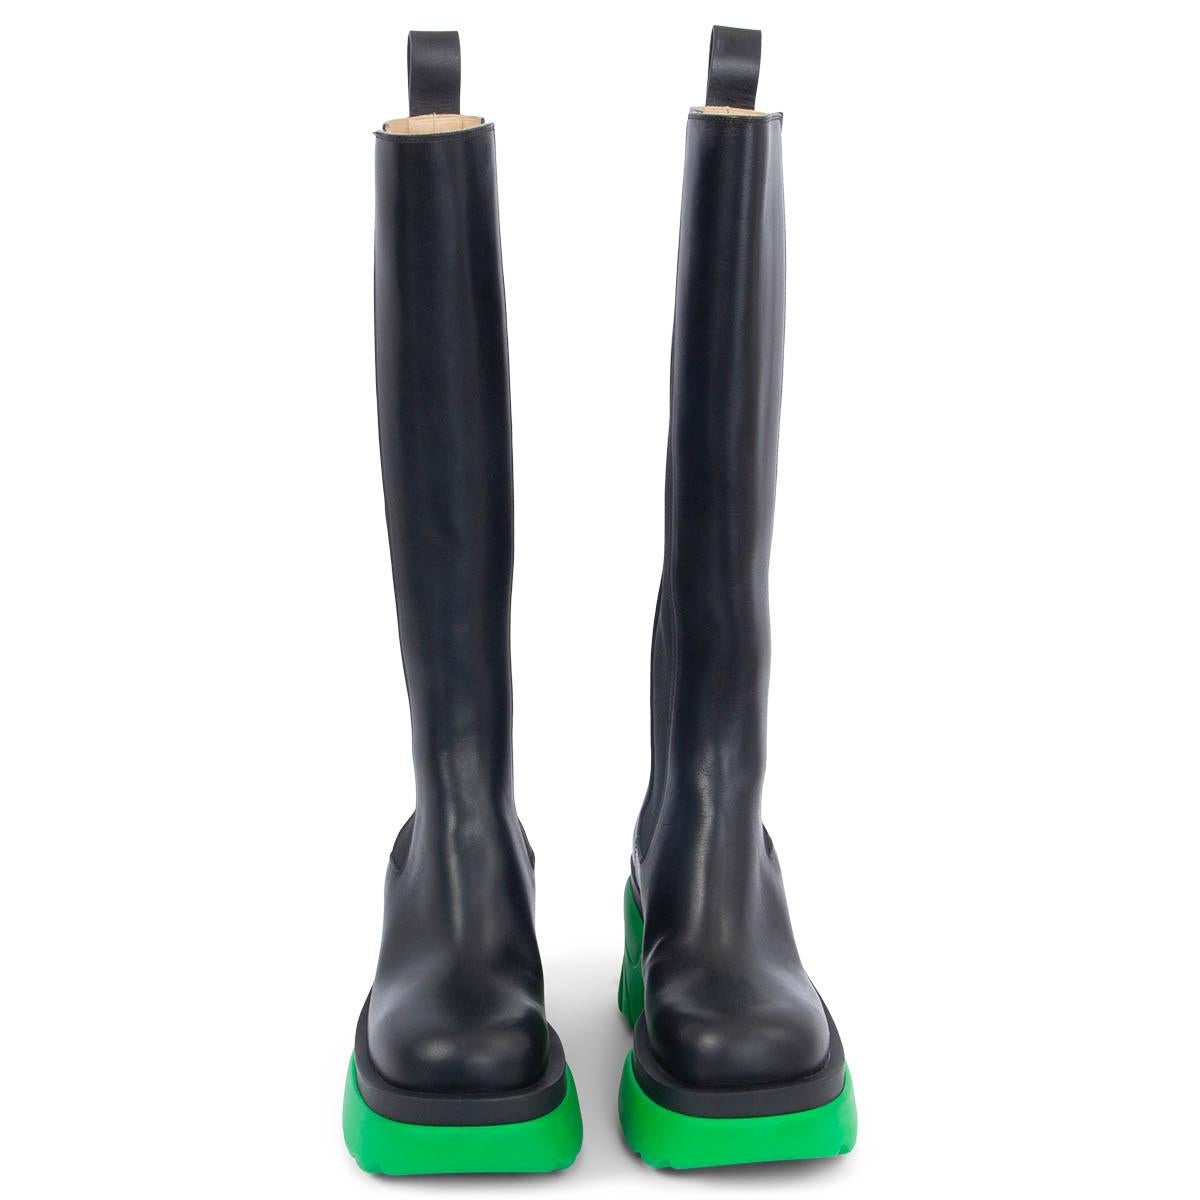 100% authentic Bottega Veneta Flash knee- high boots in black calfskin featuring the chunky parakeet-green sole that's shaped with flame-like grooves, inspired by supercars. The design comes with elasticated side gussets, a heel pull tab and block